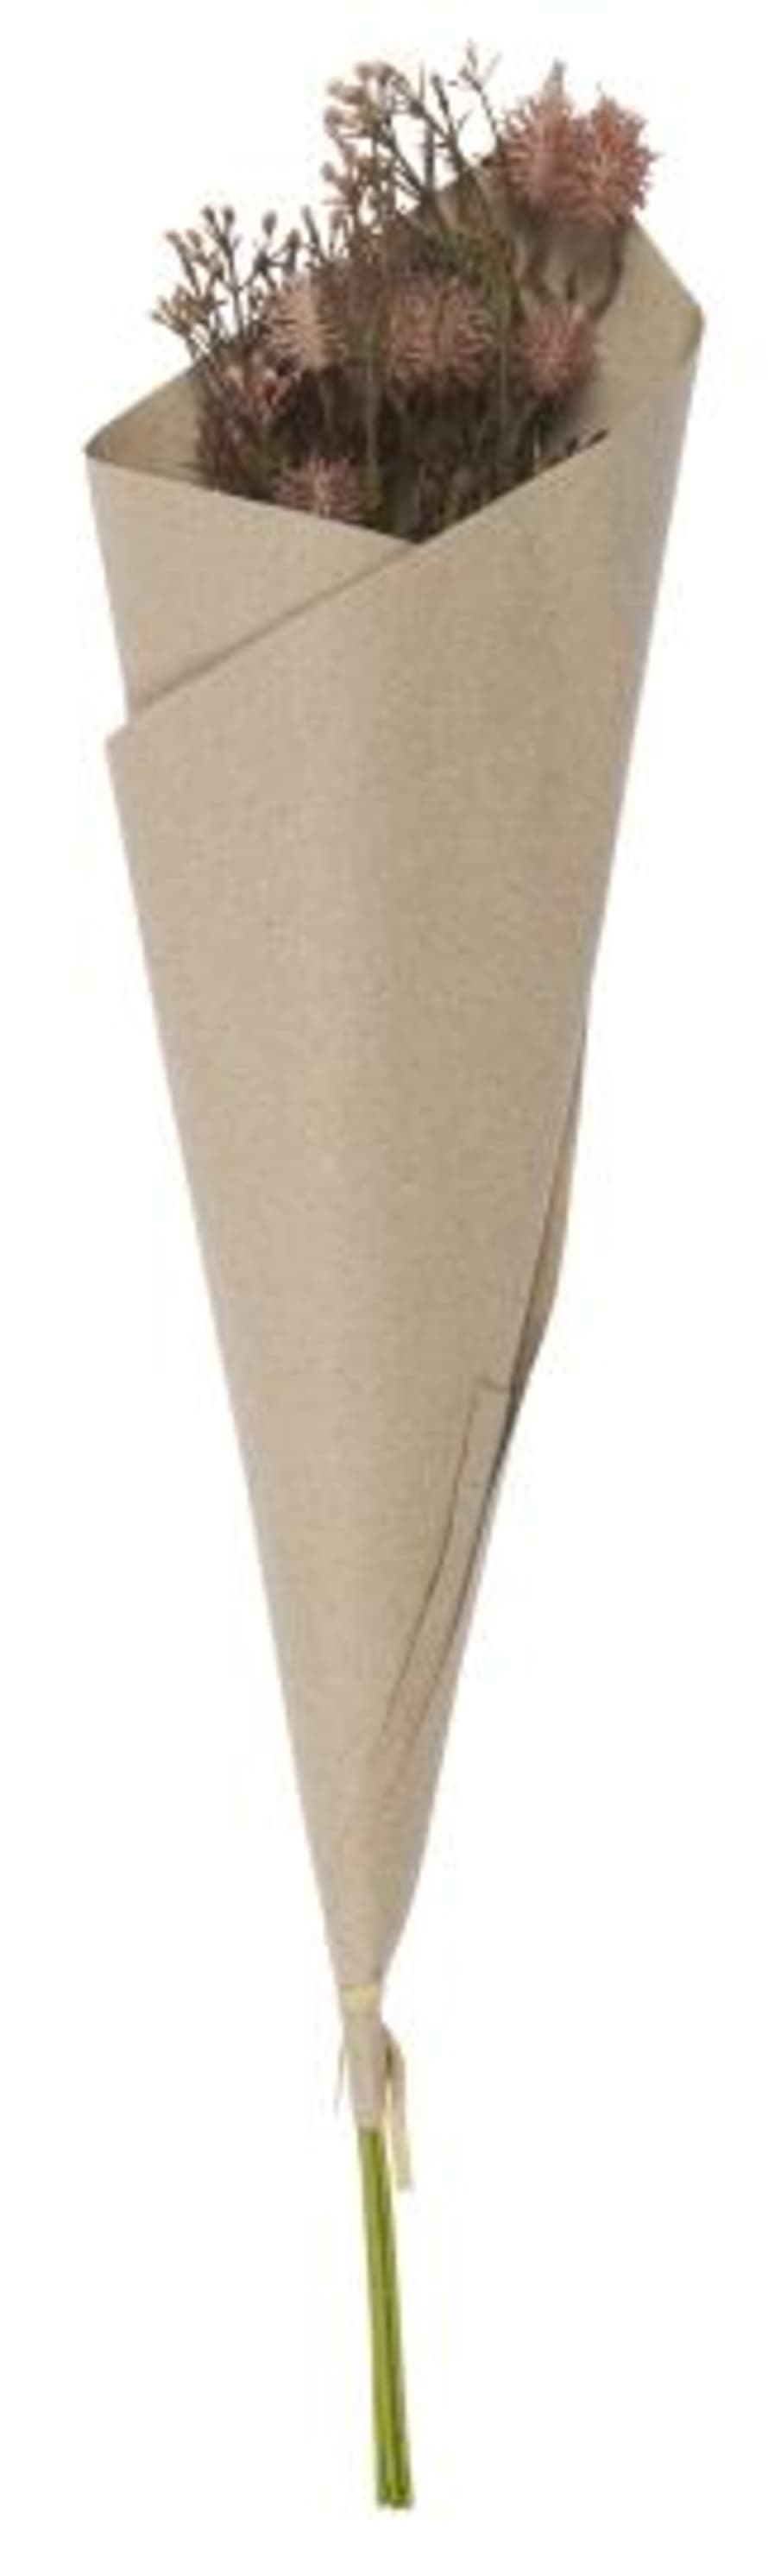 Ib Laursen Bouquet Wrapped in Kraft Paper Shades